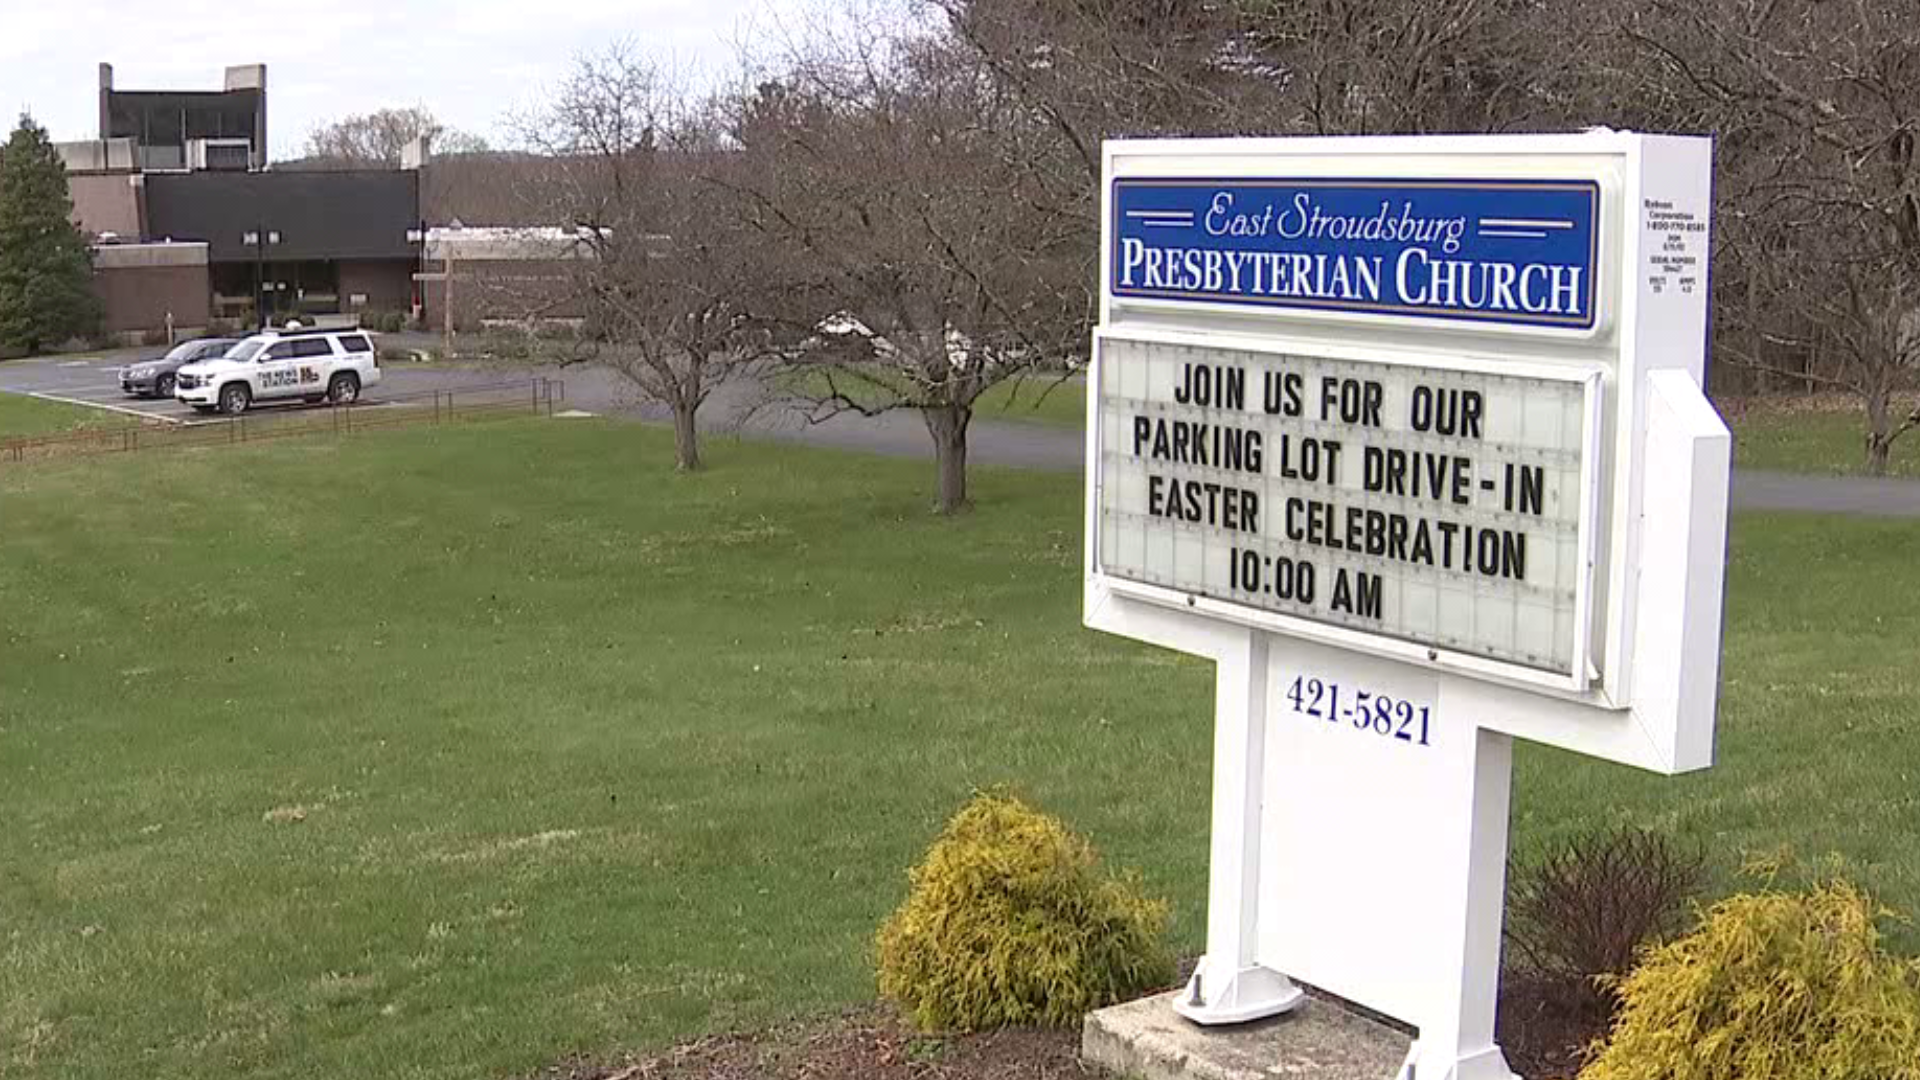 You can watch Easter Sunday service drive-in style at East Stroudsburg Presbyterian Church.